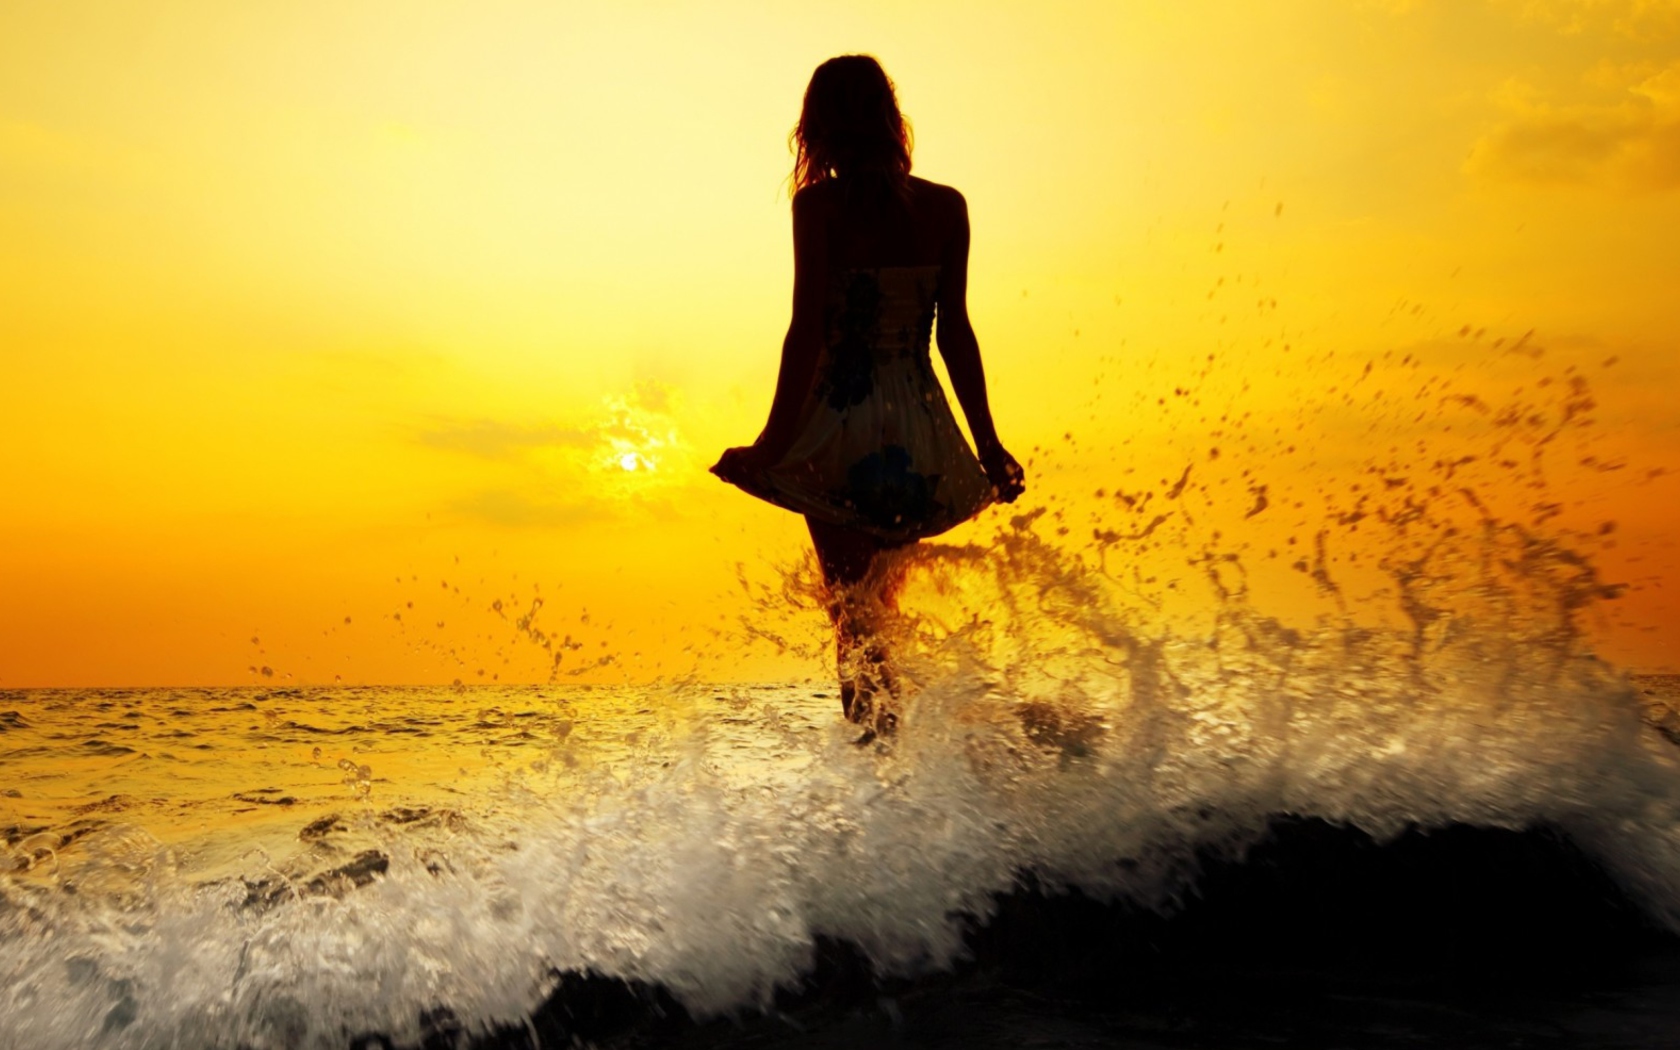 Girl Silhouette In Sea Waves At Sunset wallpaper 1680x1050